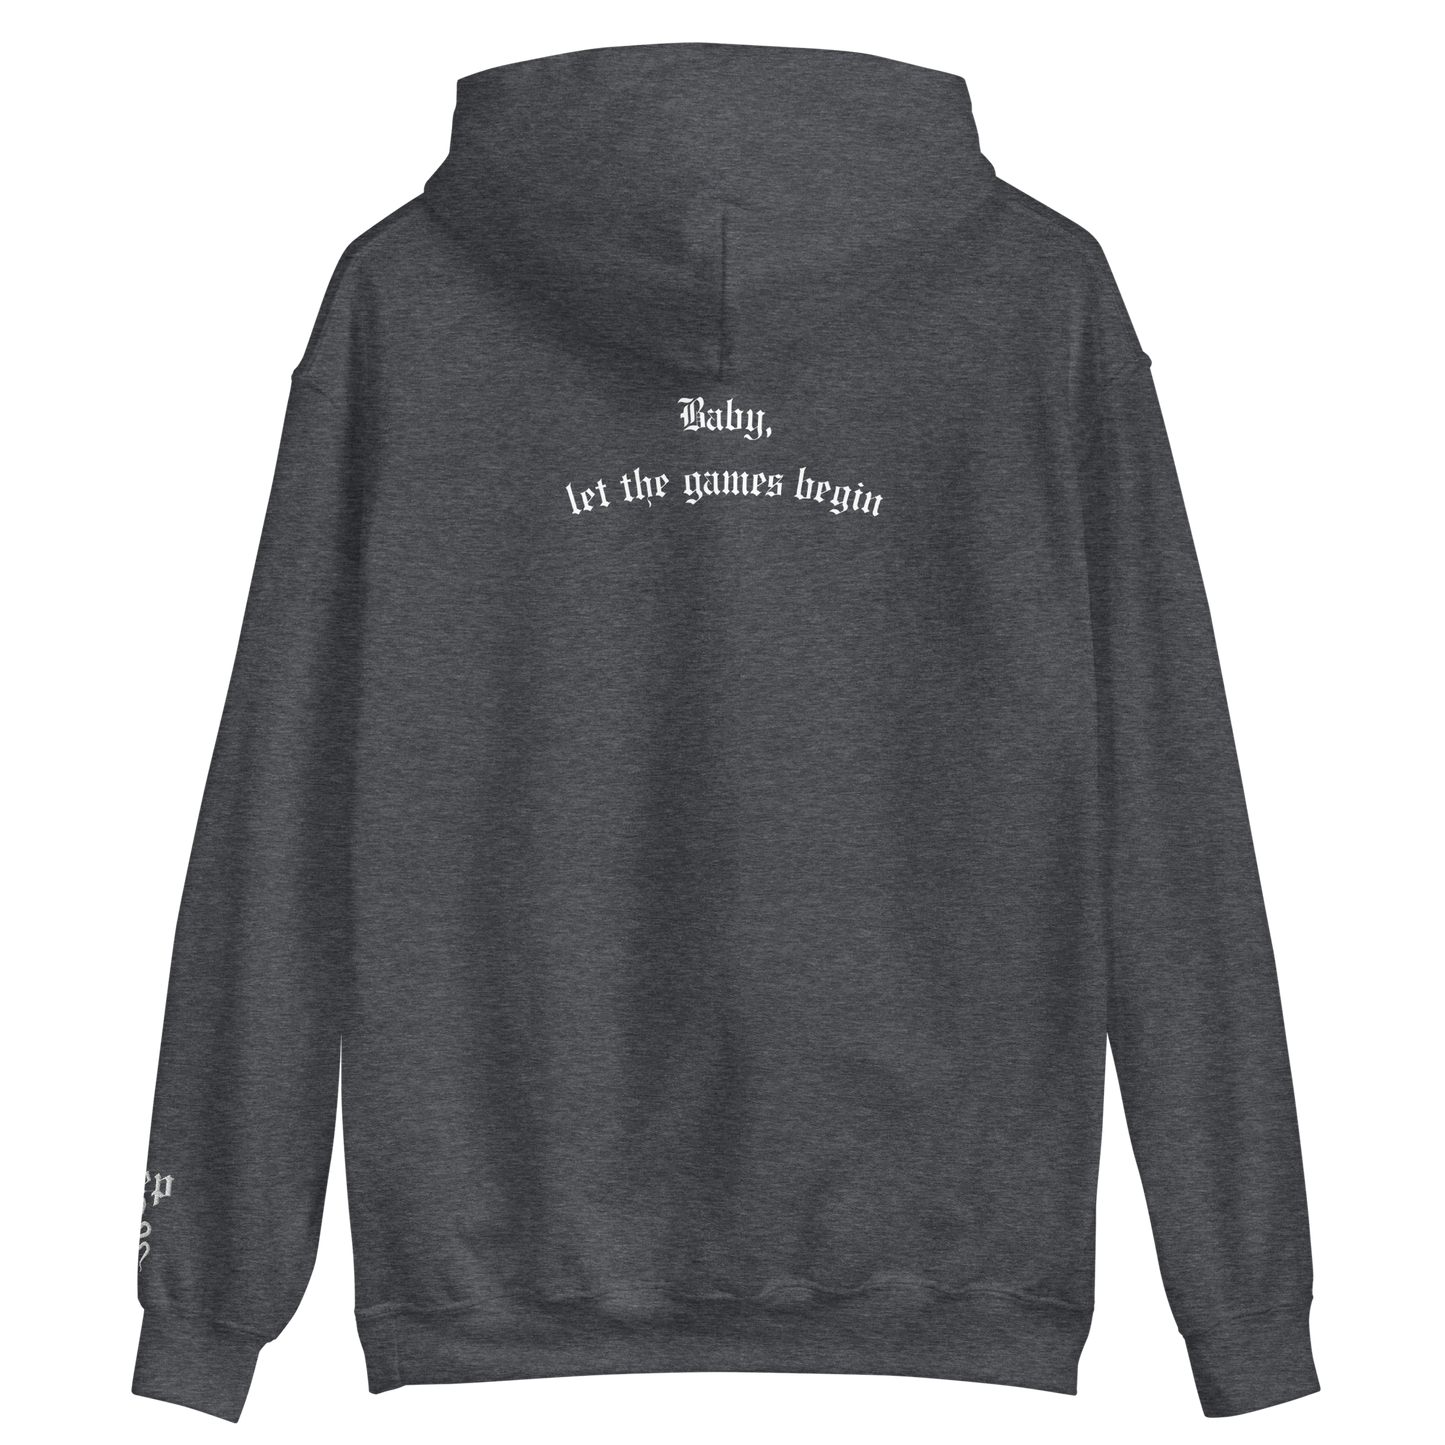 … ready for it? - Embroidered Hoodie